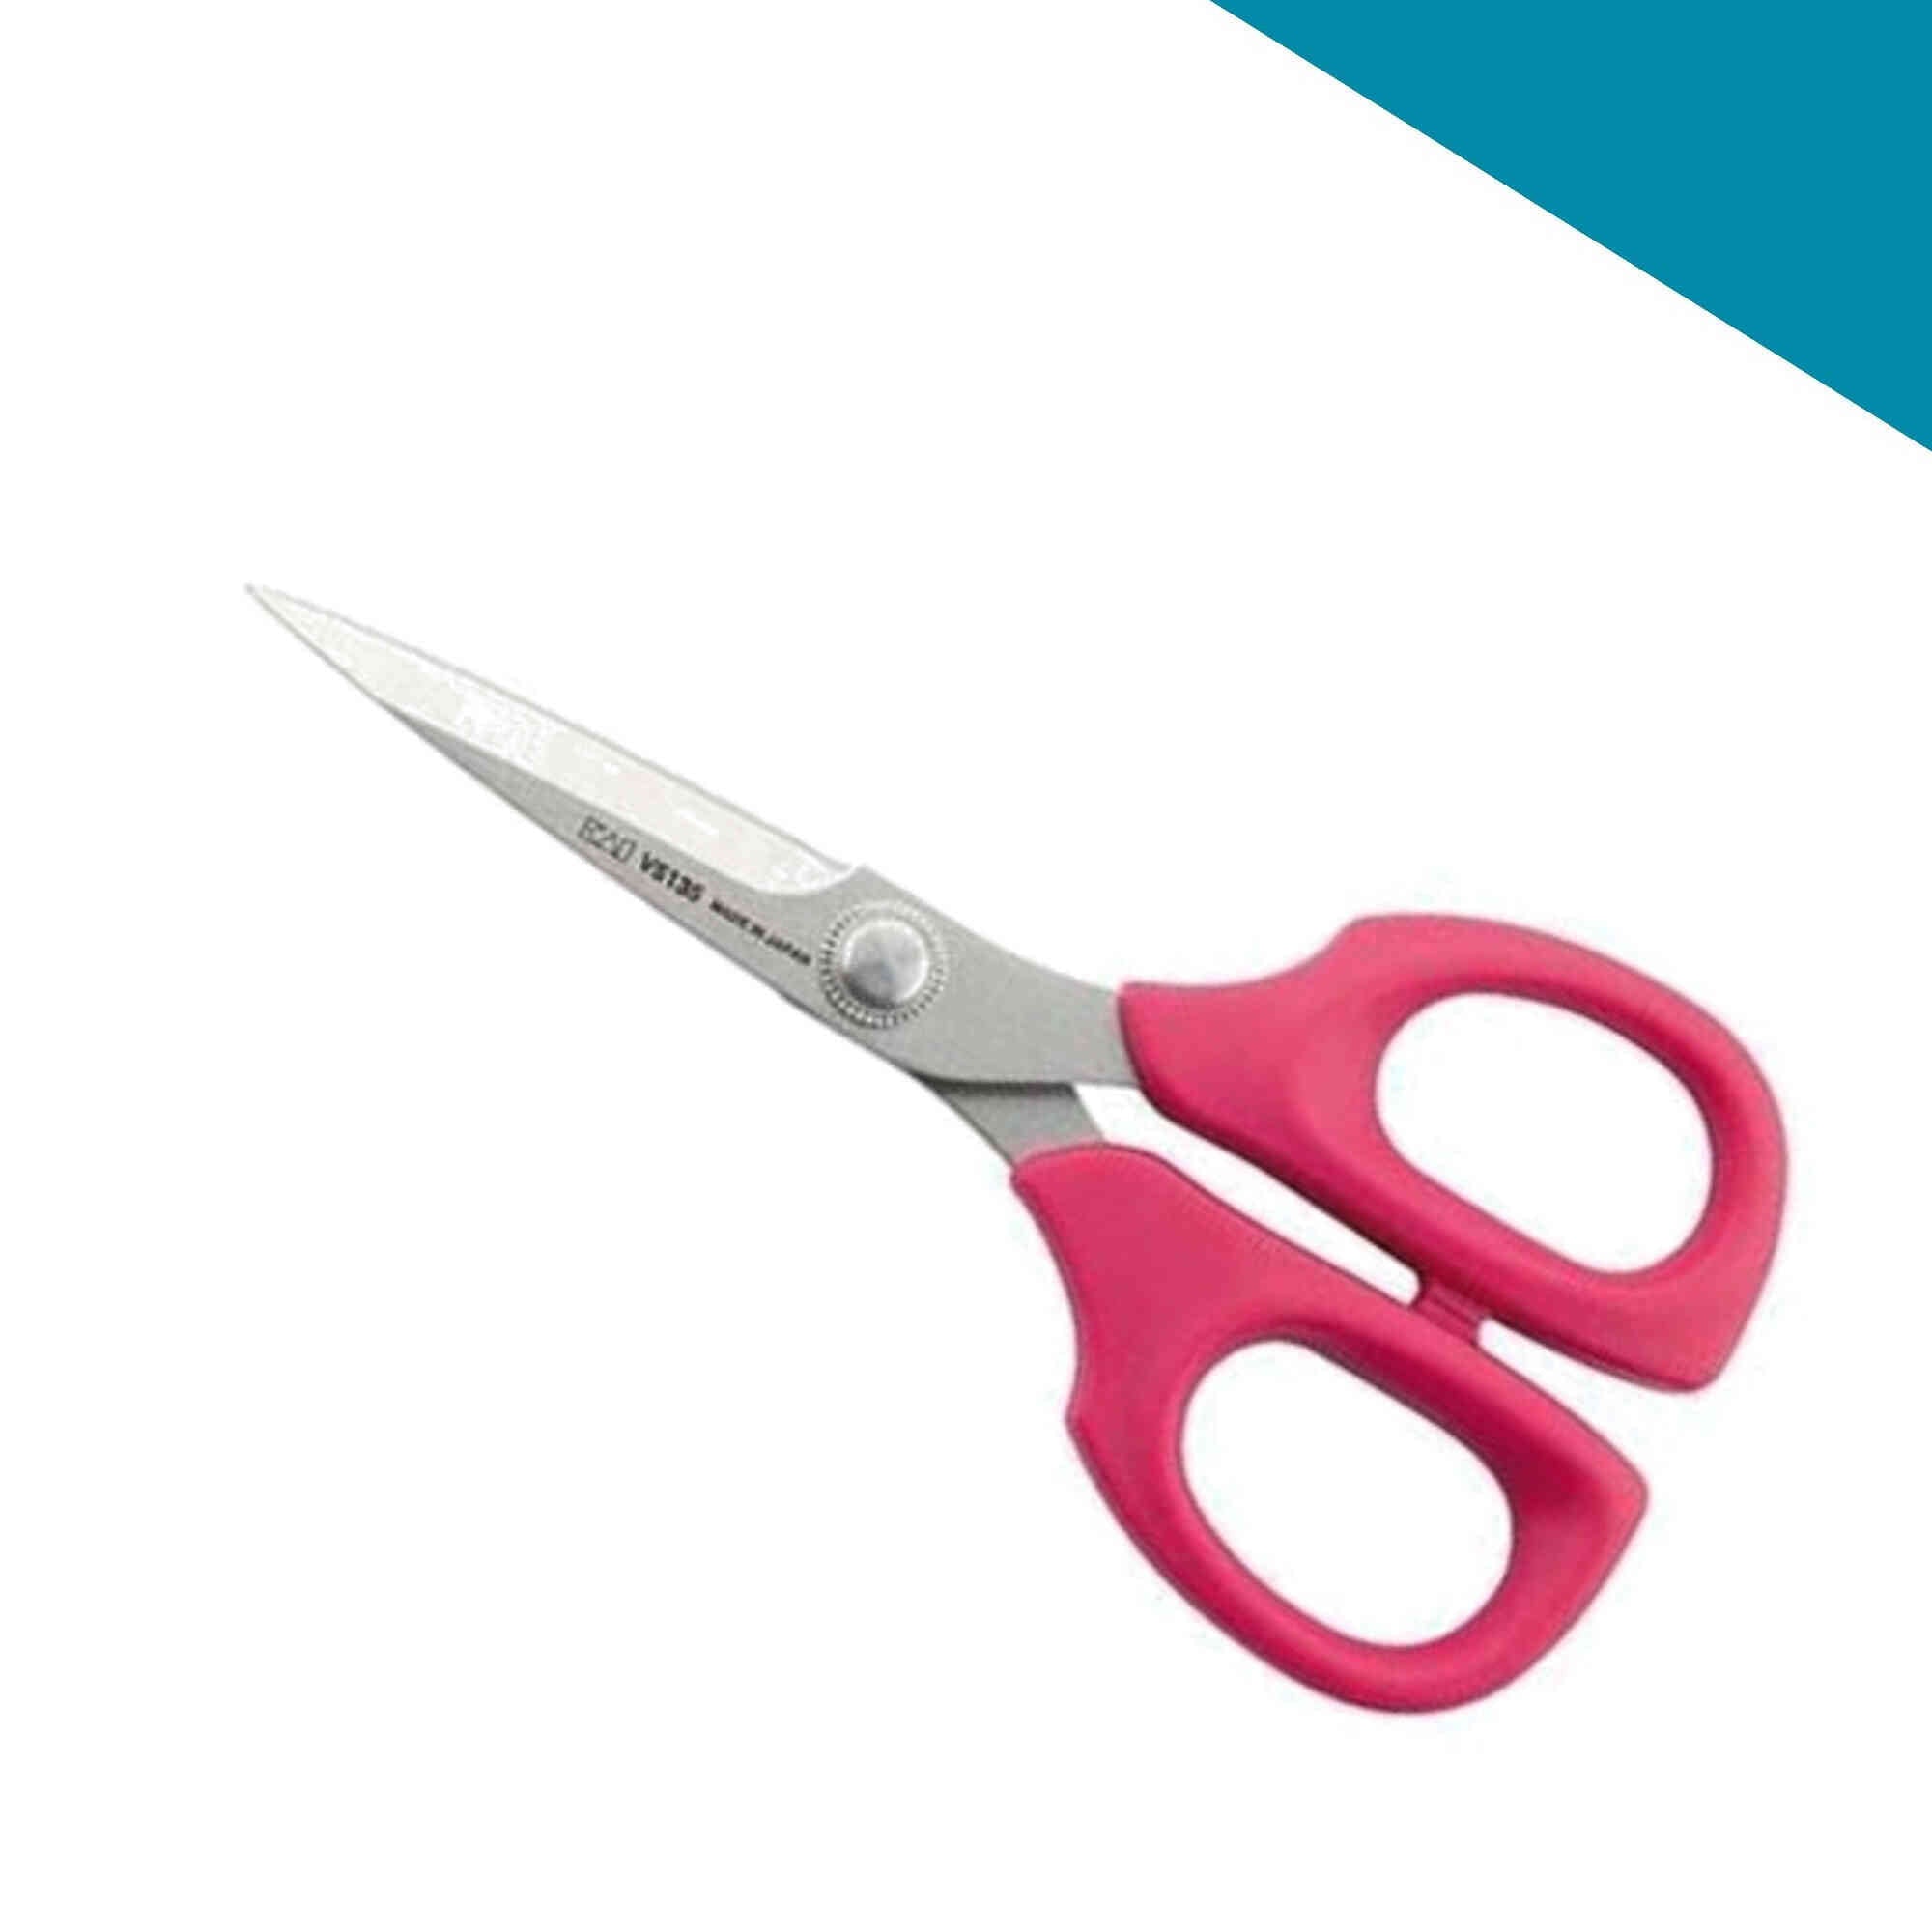 Kai 5135p 5.5 inch PINK Embroidery Scissors